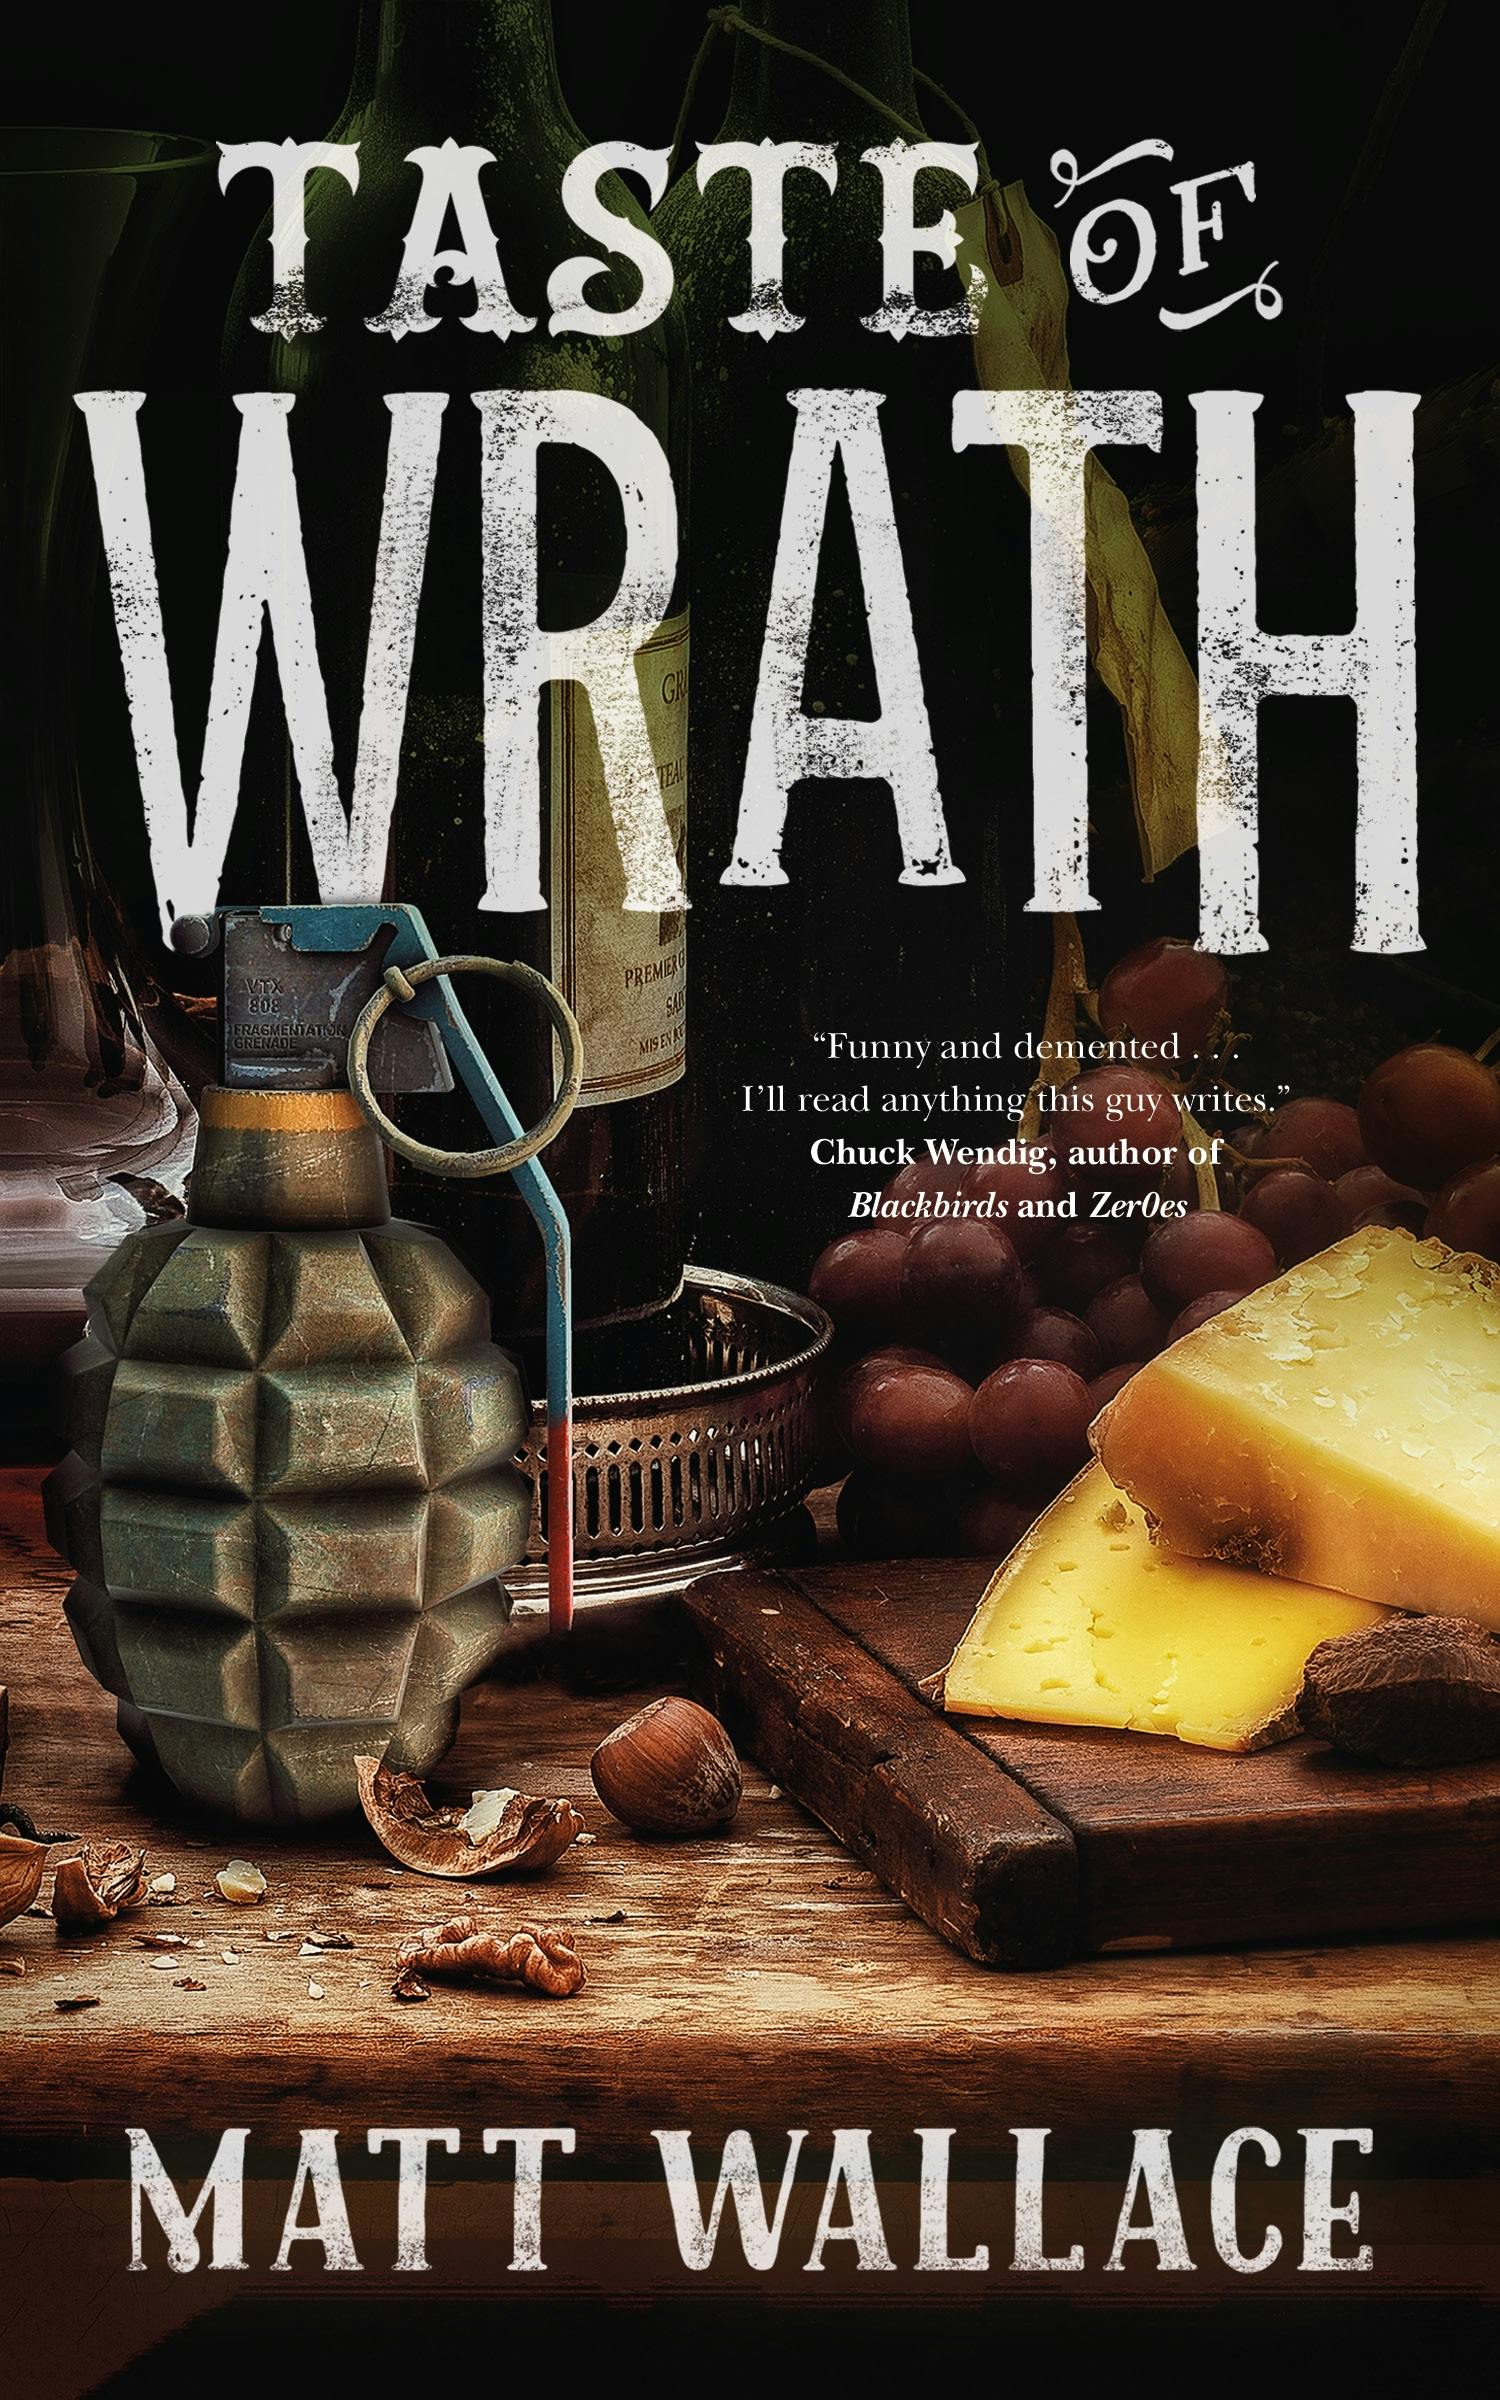 Cover for the book titled as: Taste of Wrath